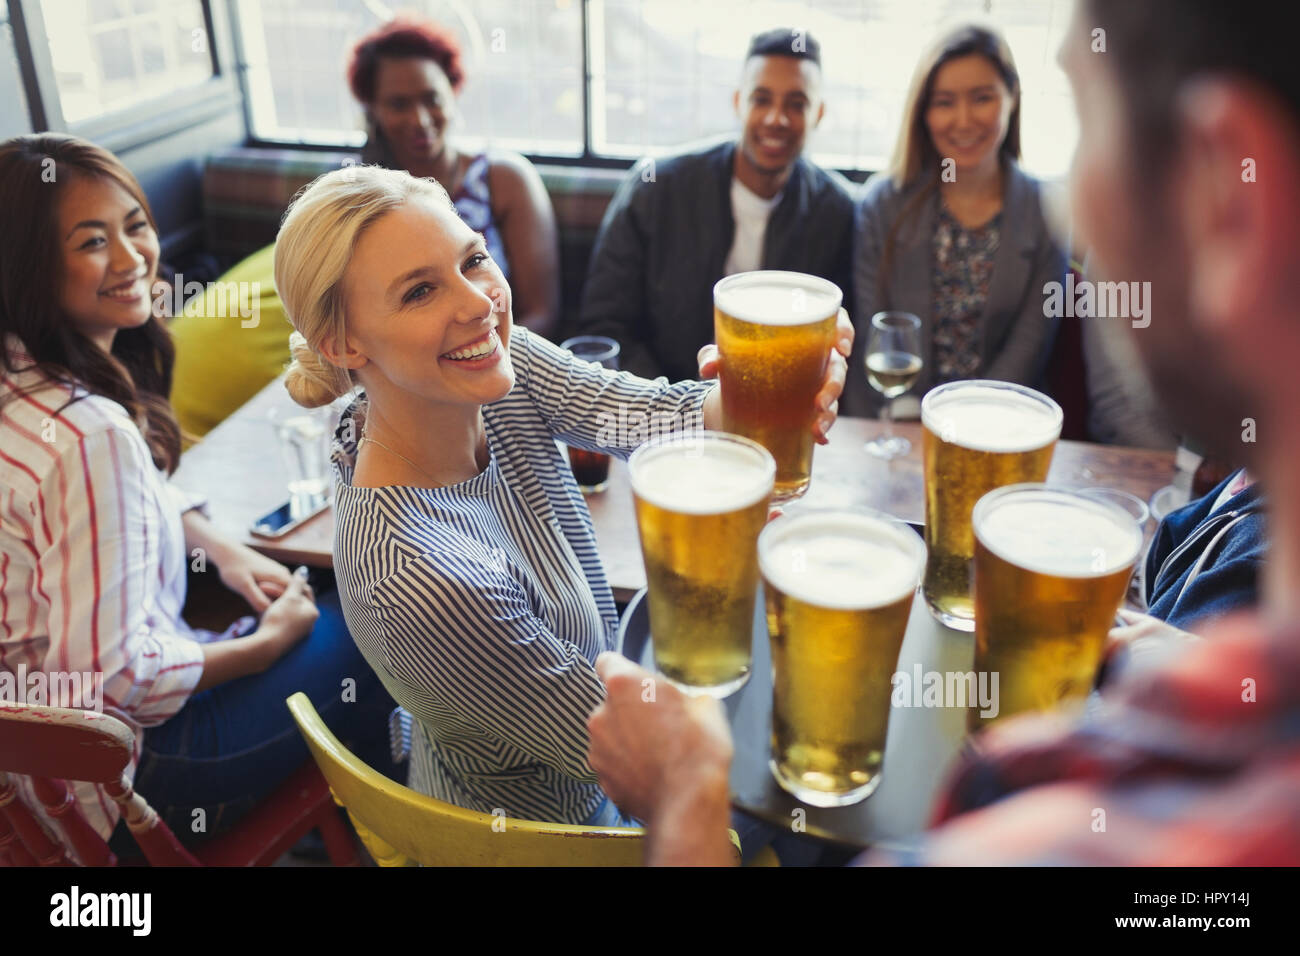 Bartender serving beers on tray to friends in bar Stock Photo